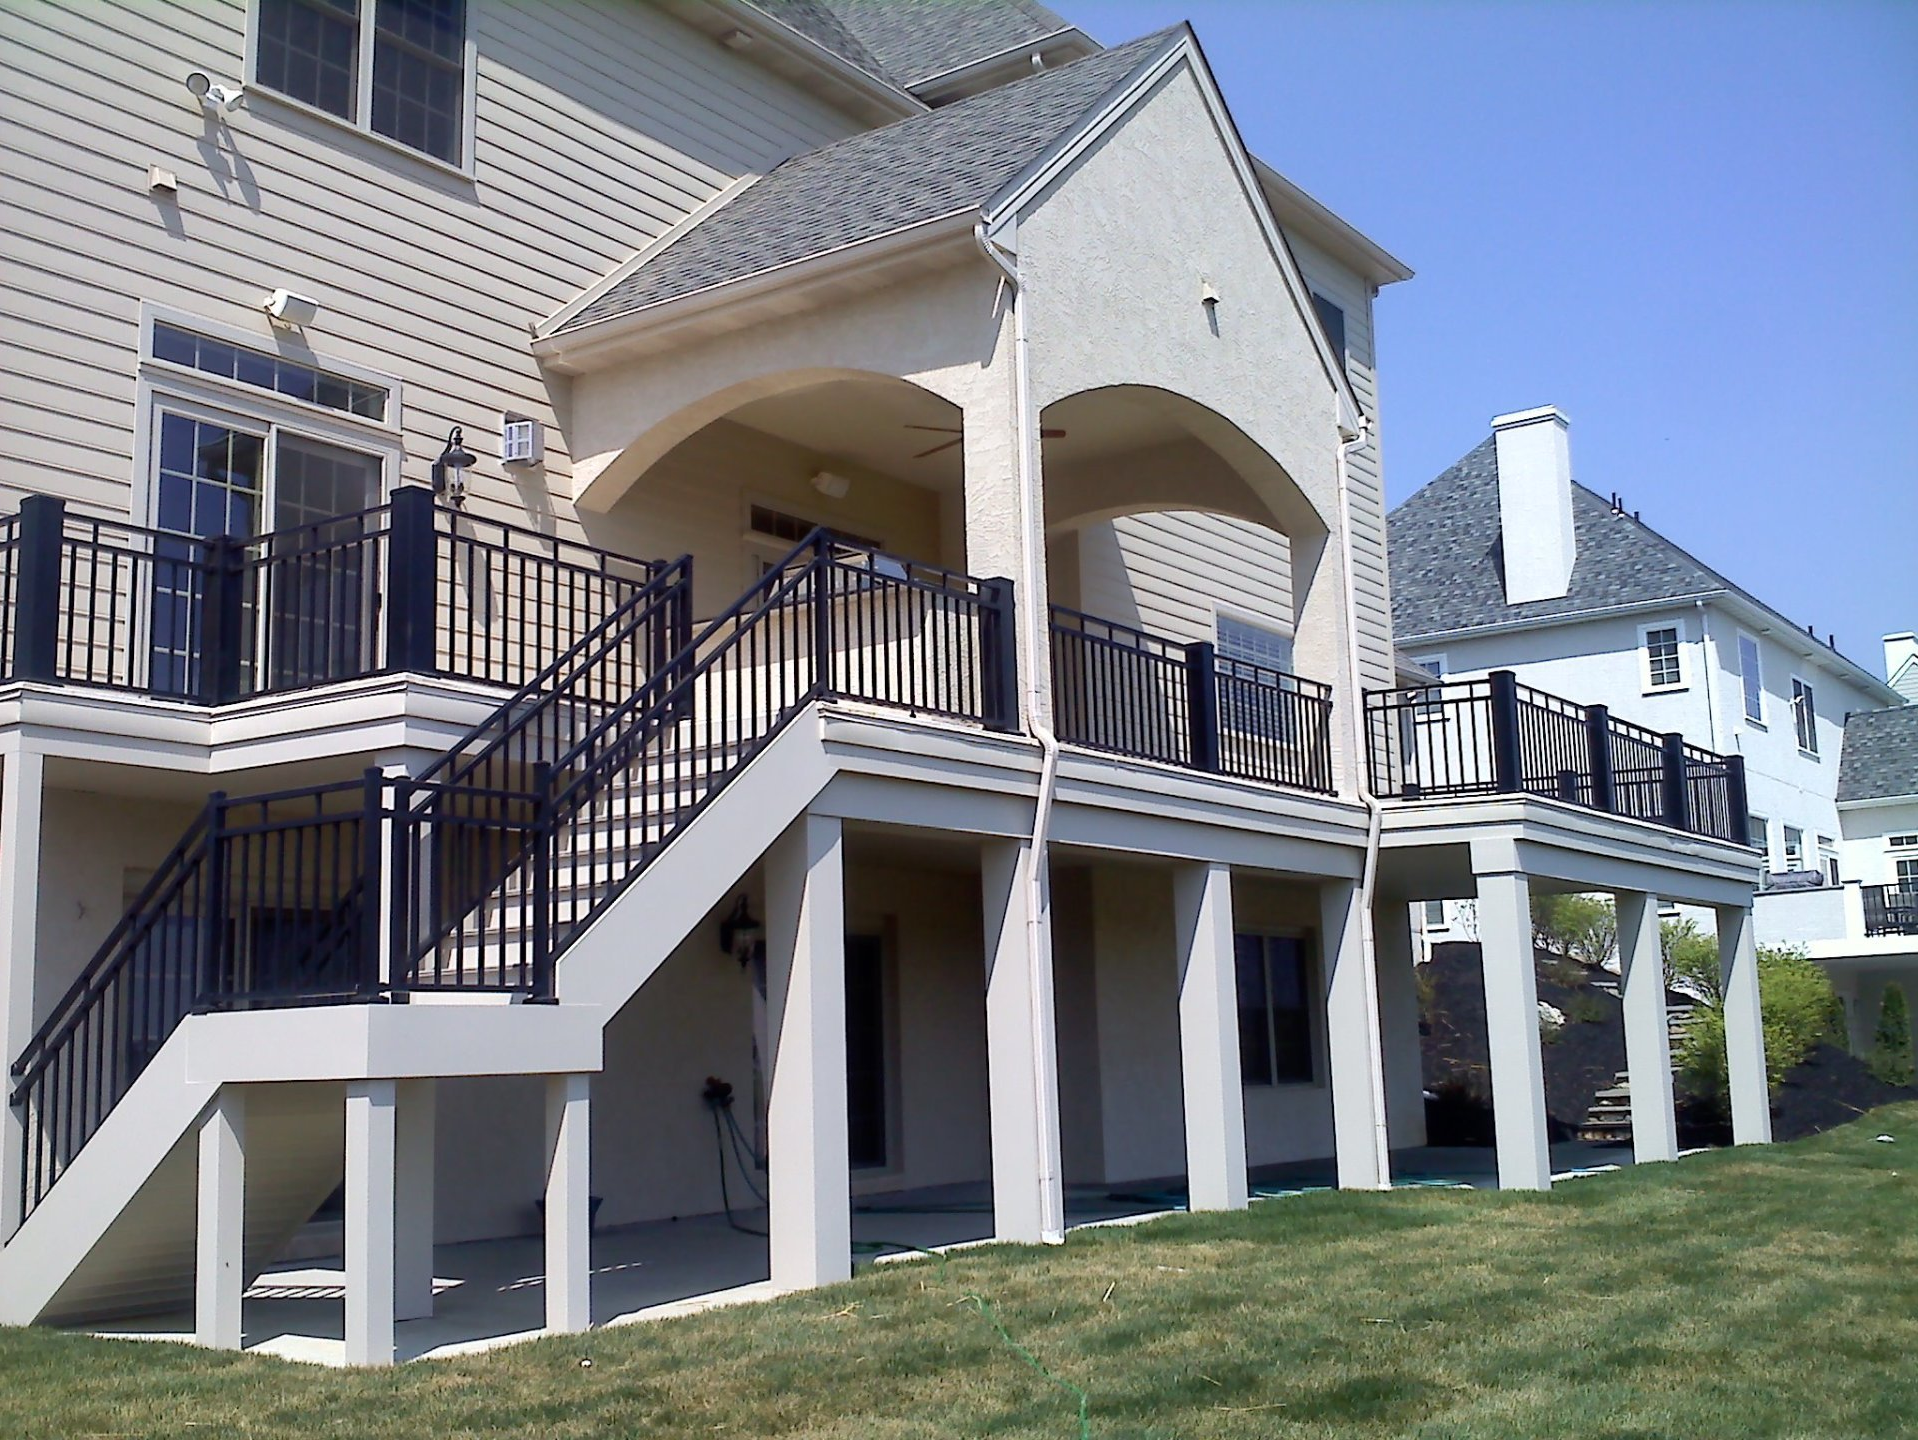 Beautiful fences and railings from Millcreek Fence & Decks LLC in Central PA